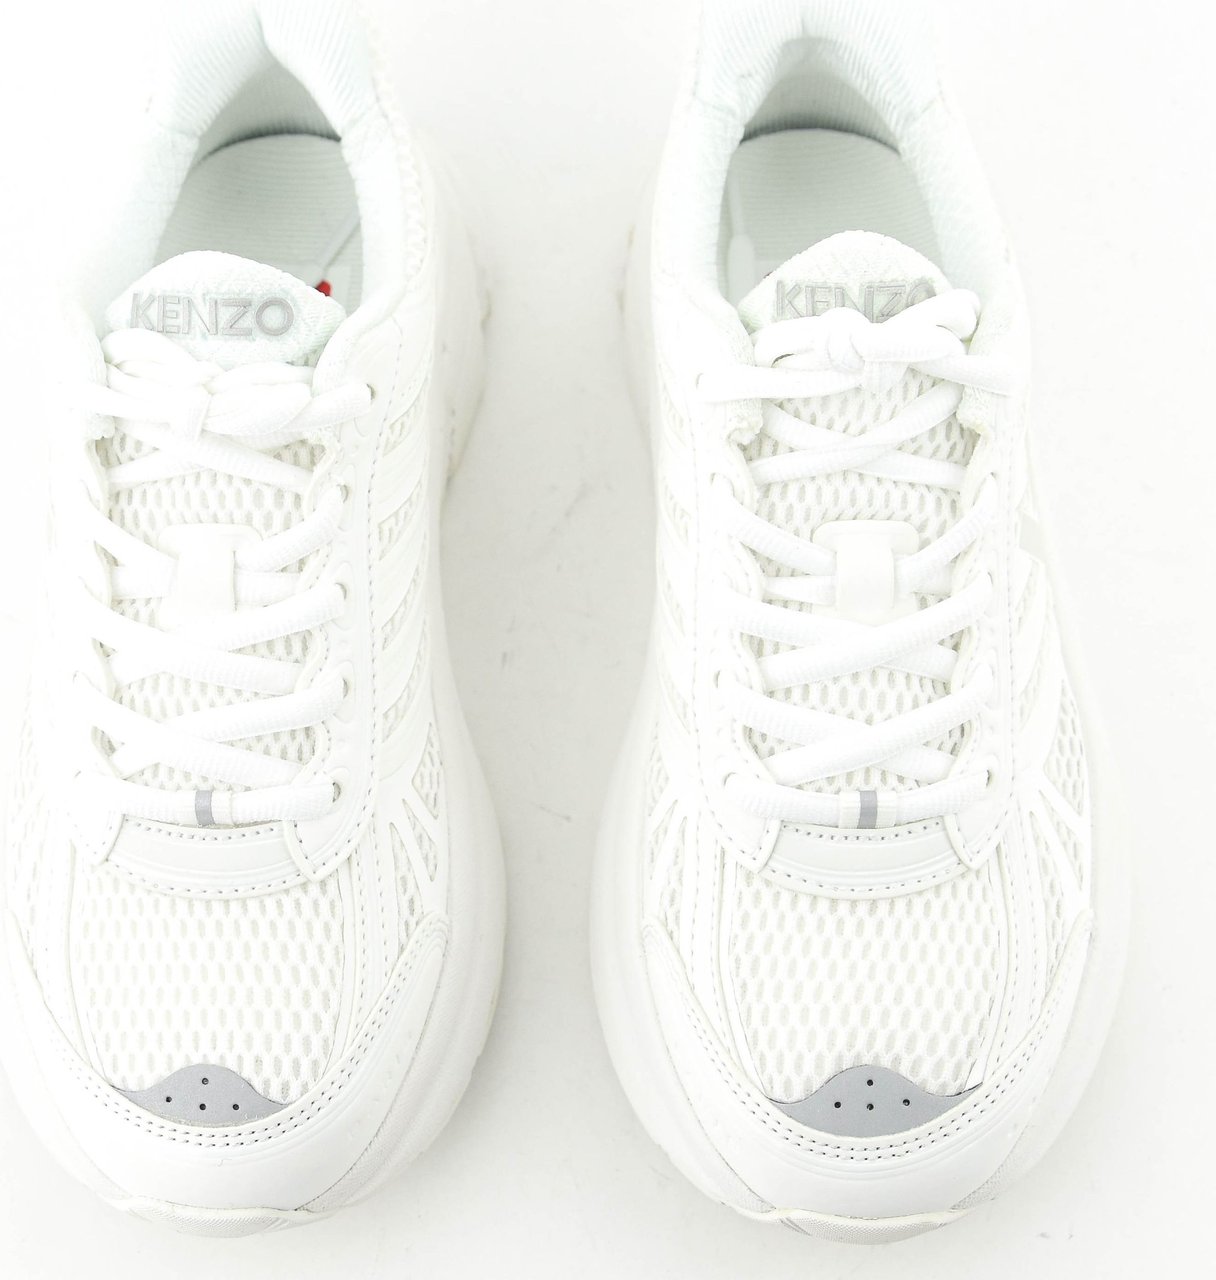 Kenzo Pace Trainer White Wit